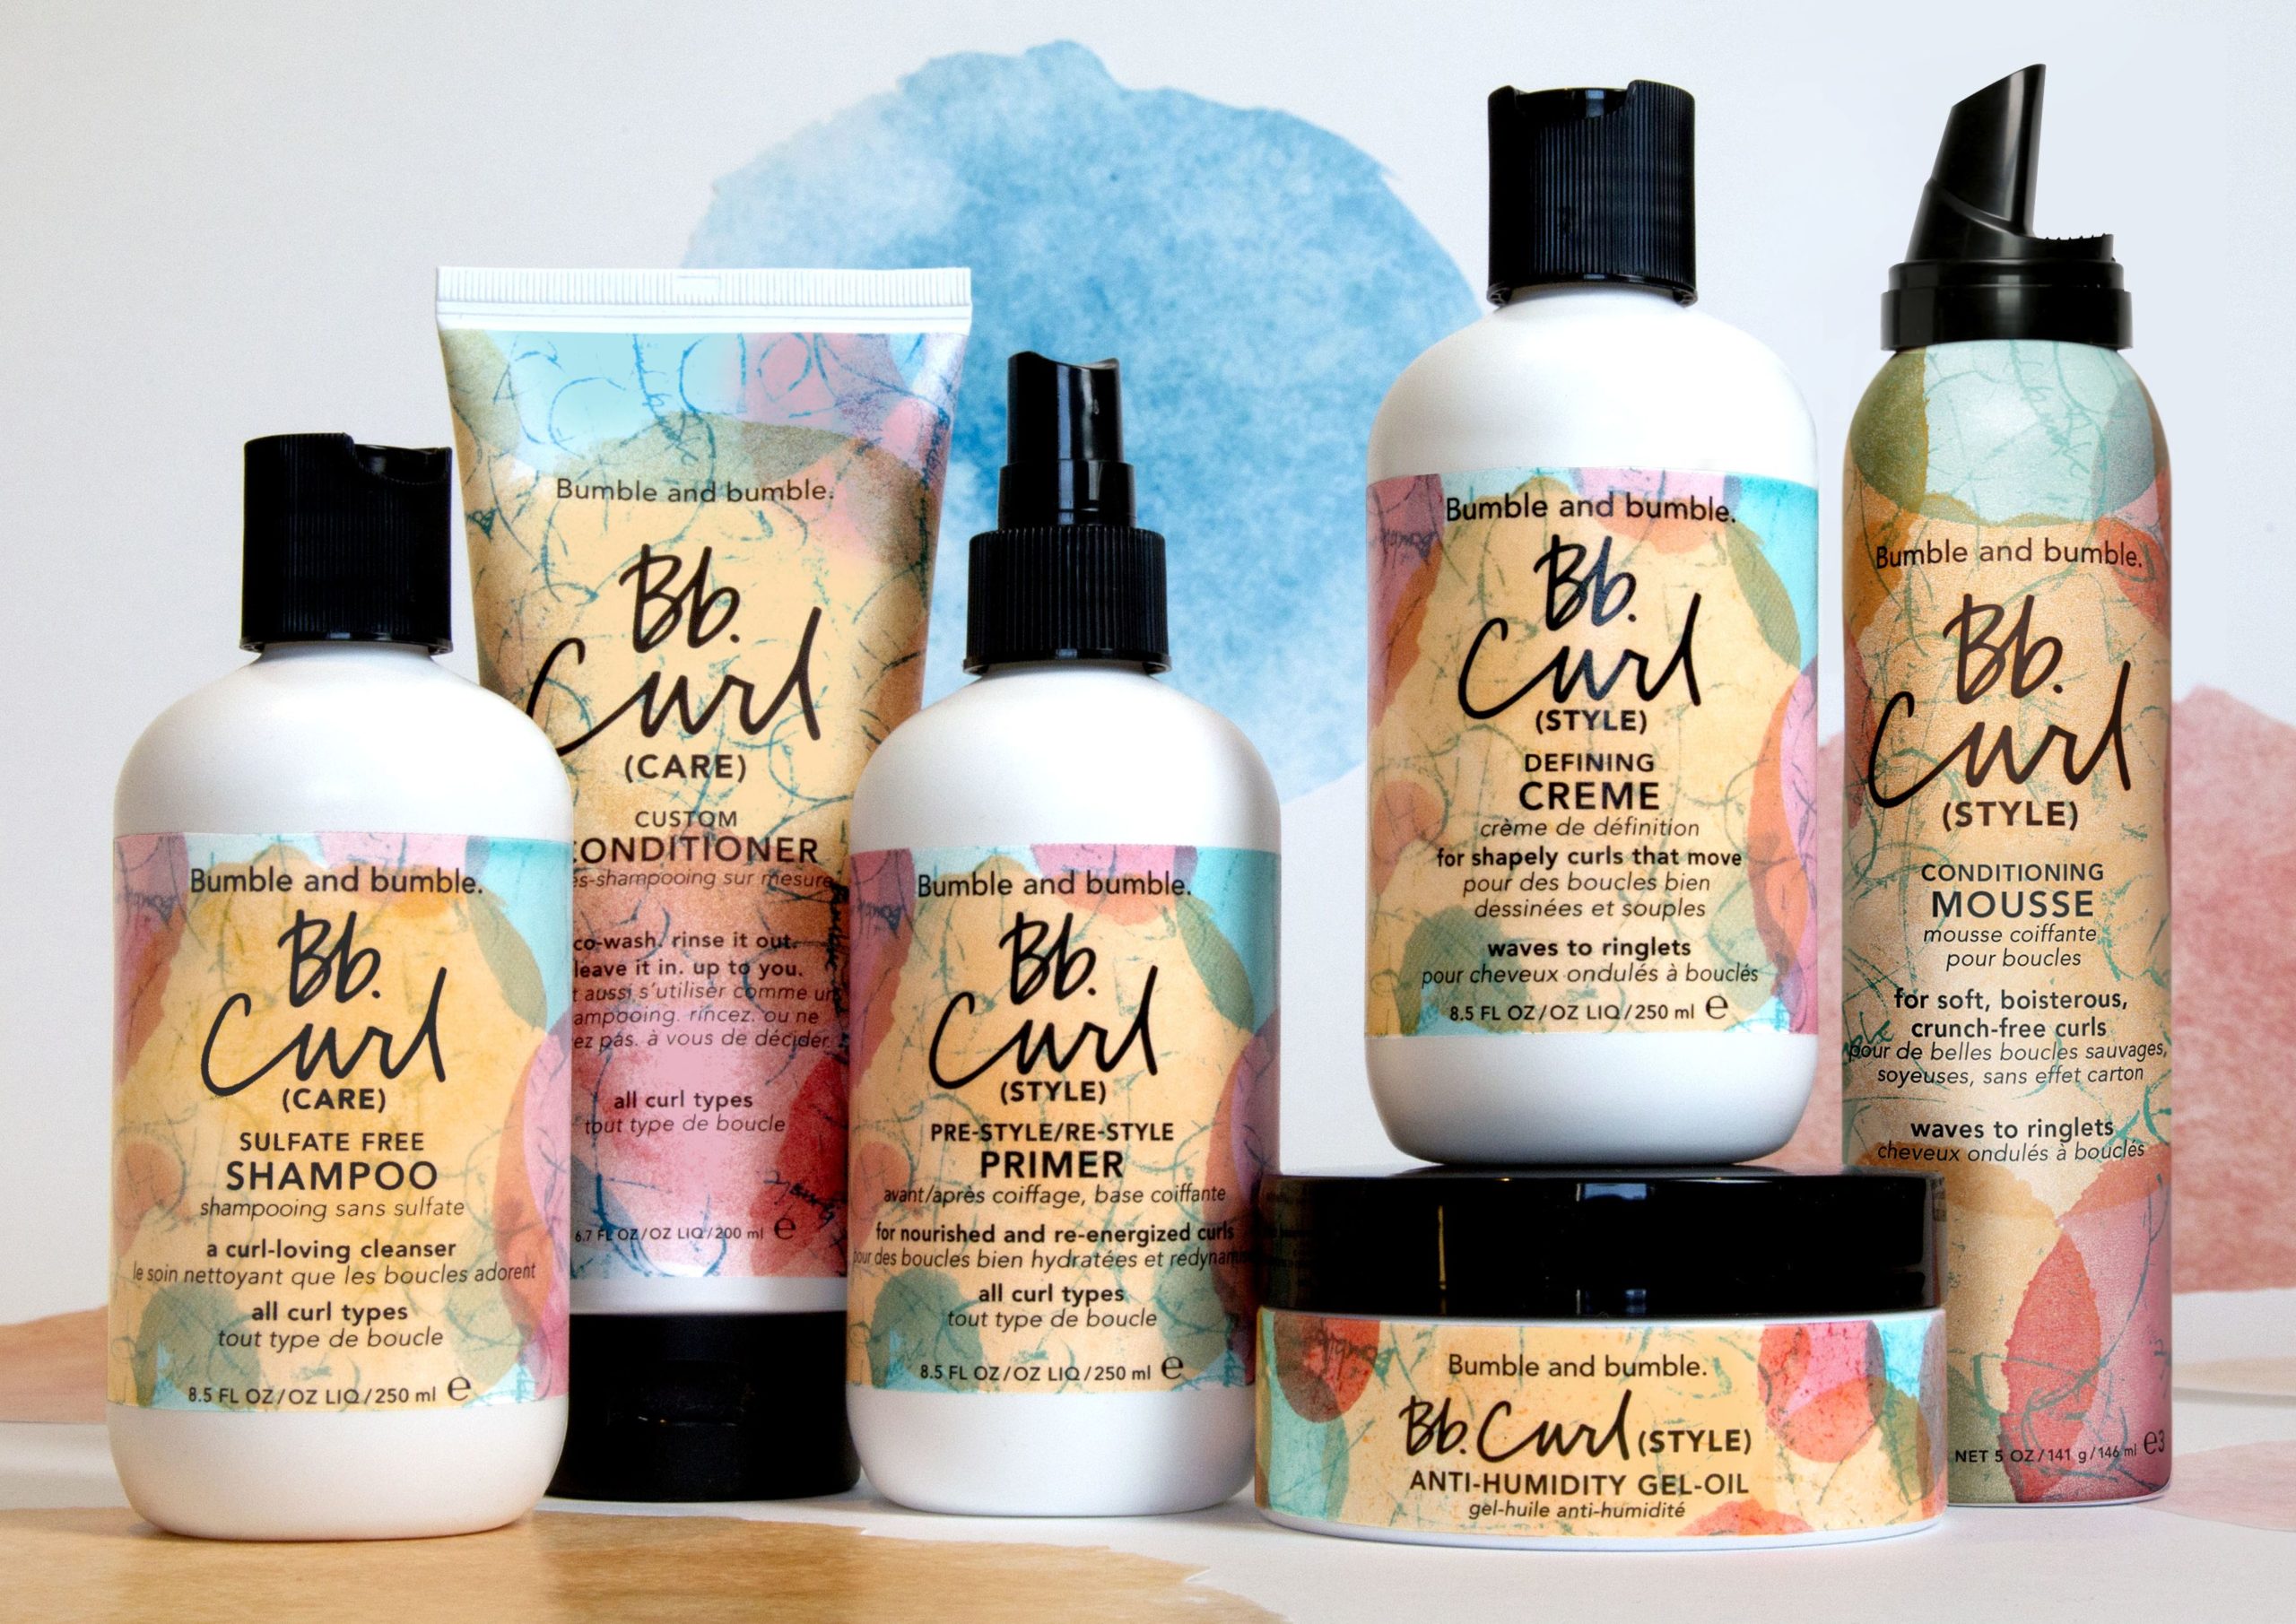 Bumble and bumble cruelty-free product range